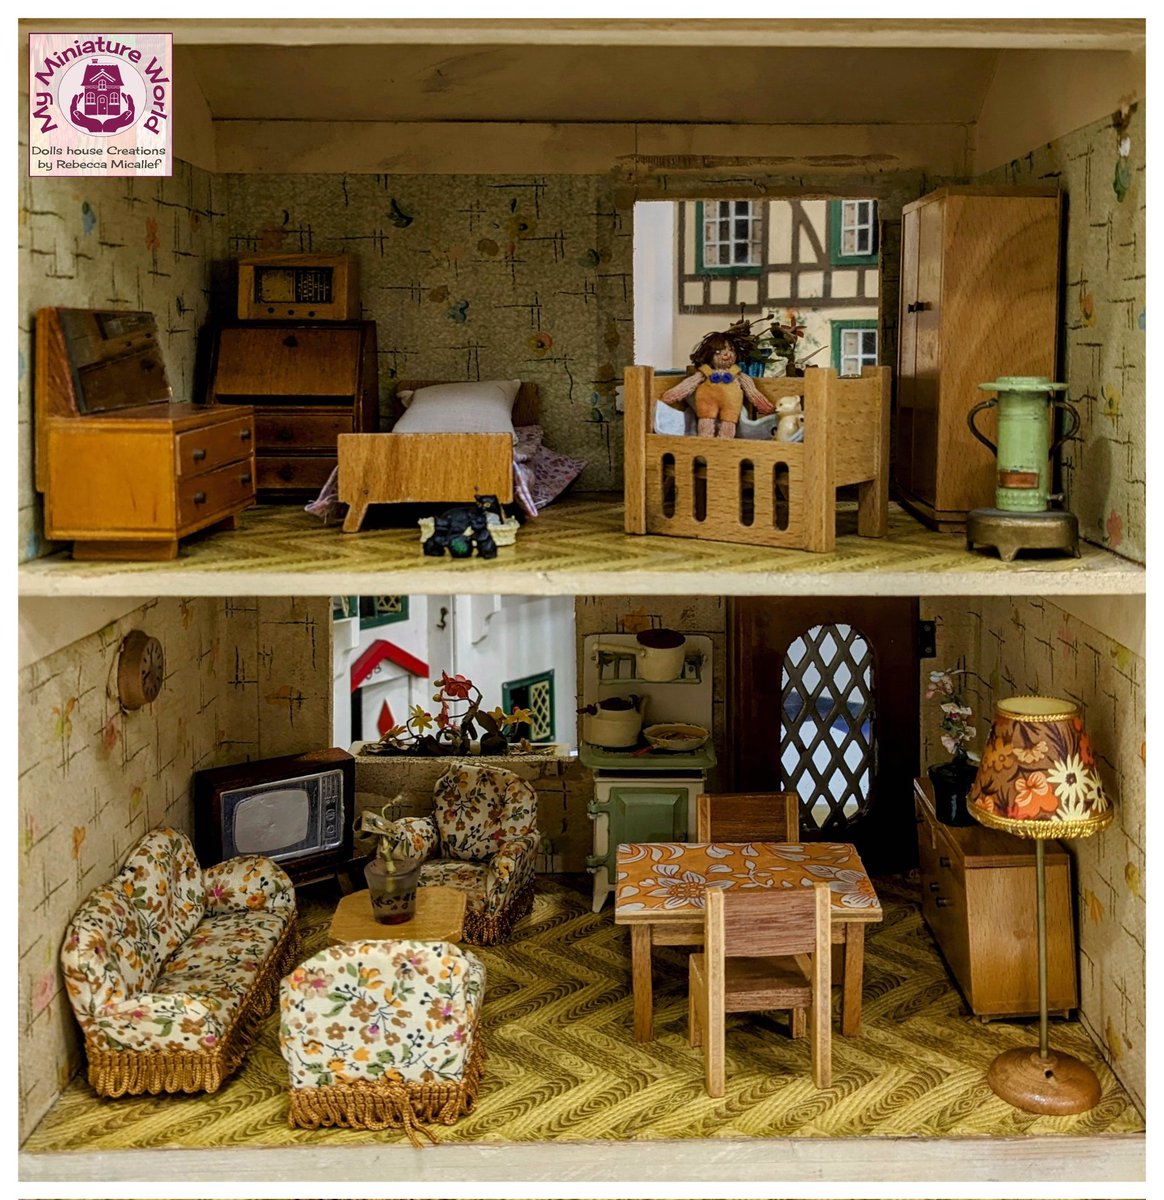 Hello Lovelies, for those who asked here is how I decorated Villa Marie with vintage furniture and accessories.

#dollshouse #miniatures #miniaturist #vintage #interiordecor #interiordesign #vintagefurniture #vintageaccessories #picoftheday #photooftheday #pictureoftheday